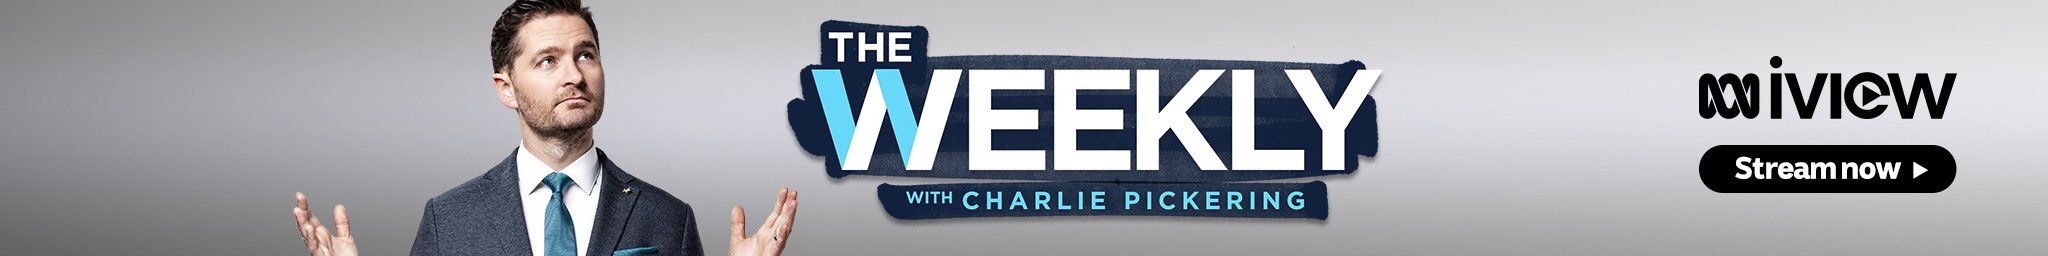 Watch the latest episode of The Weekly with Charlie Pickering on iview now